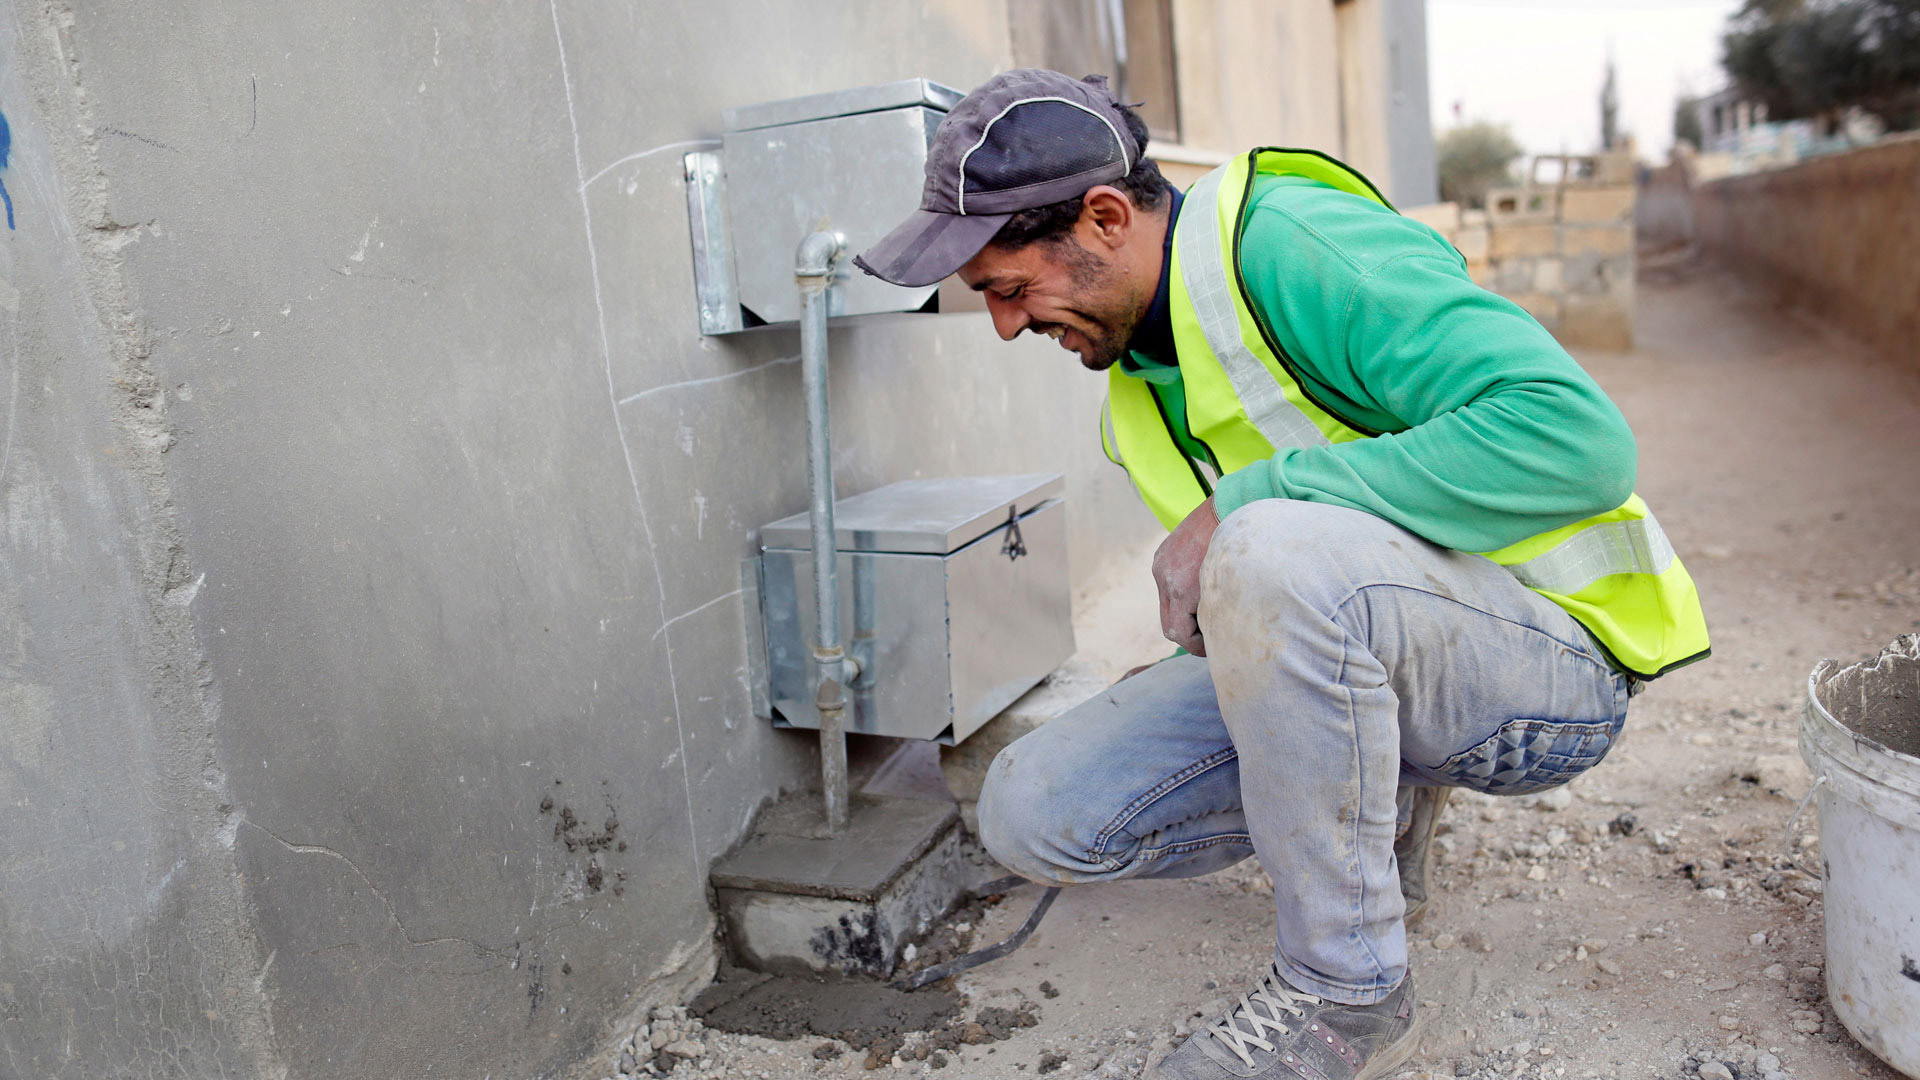 New drinking water pipes are laid at a house in the city of Mafraq in Jordan.